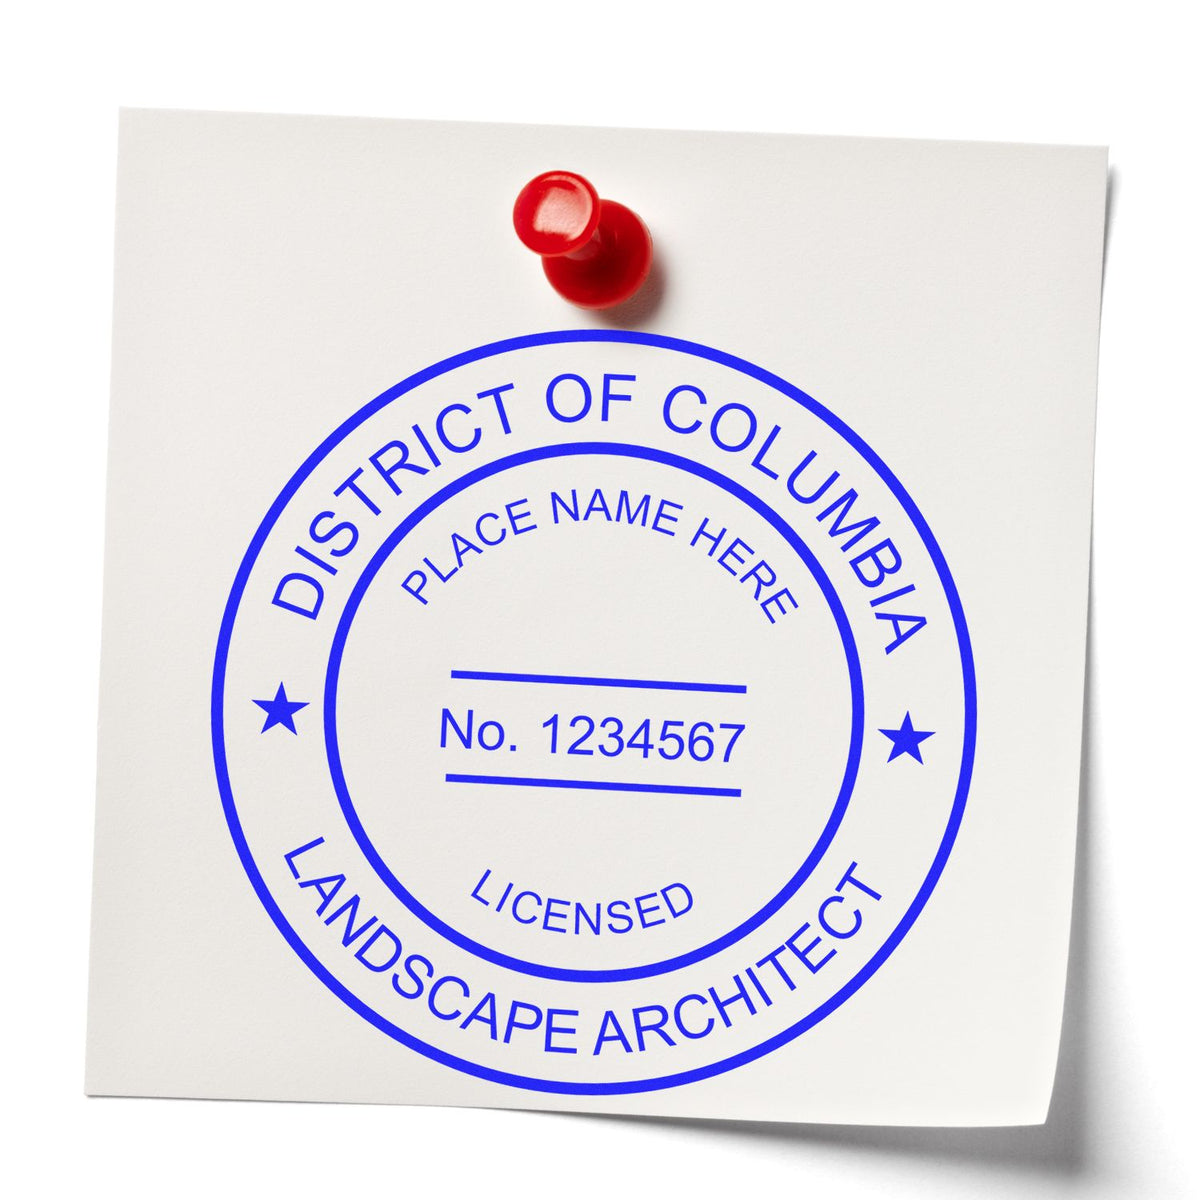 Another Example of a stamped impression of the Slim Pre-Inked District of Columbia Landscape Architect Seal Stamp on a piece of office paper.